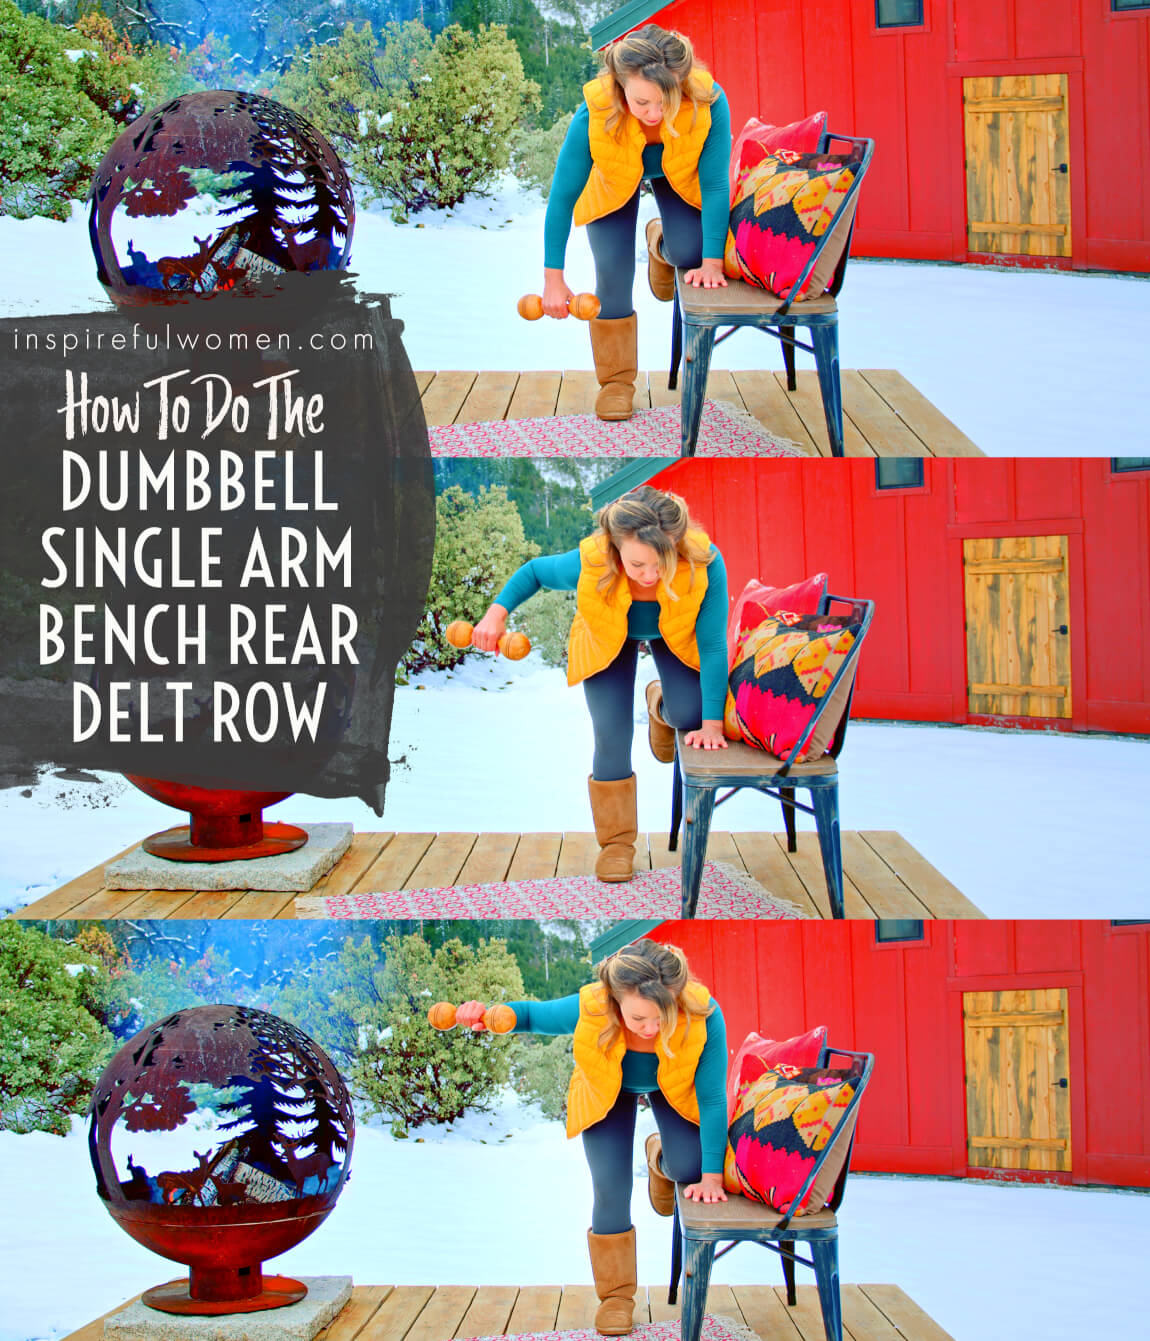 how-to-do-dumbbell-single-arm-bench-near-delt-row-shoulder-exercise-at-home-women-over-40